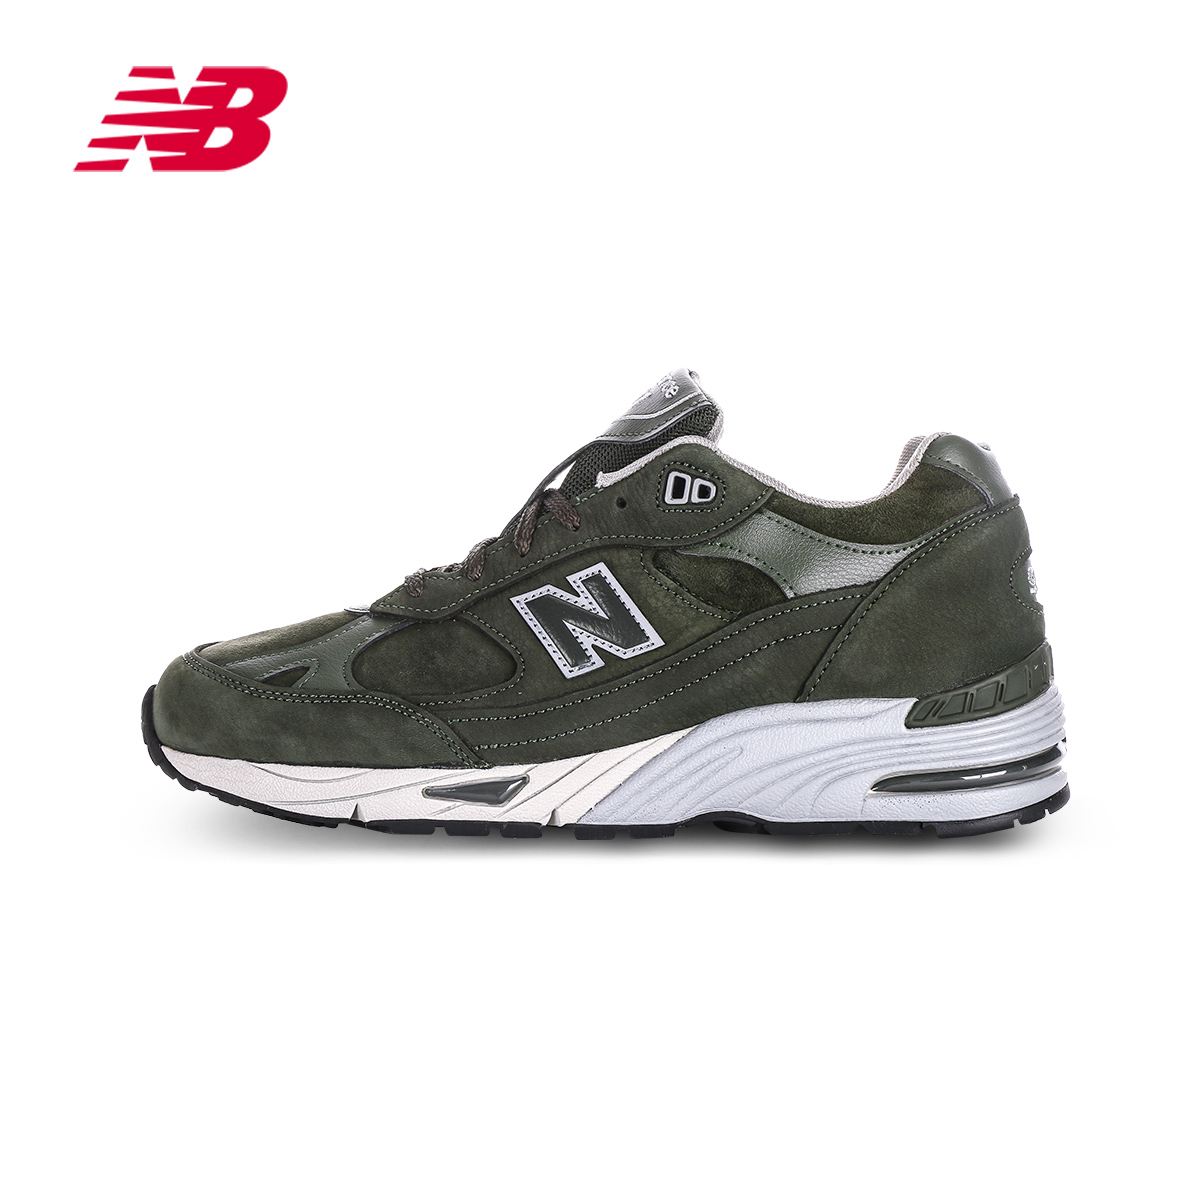 Buy New balance/nb 99x series mens retro shoes running shoes casual sports  shoes M991SDB import in Cheap Price on Alibaba.com